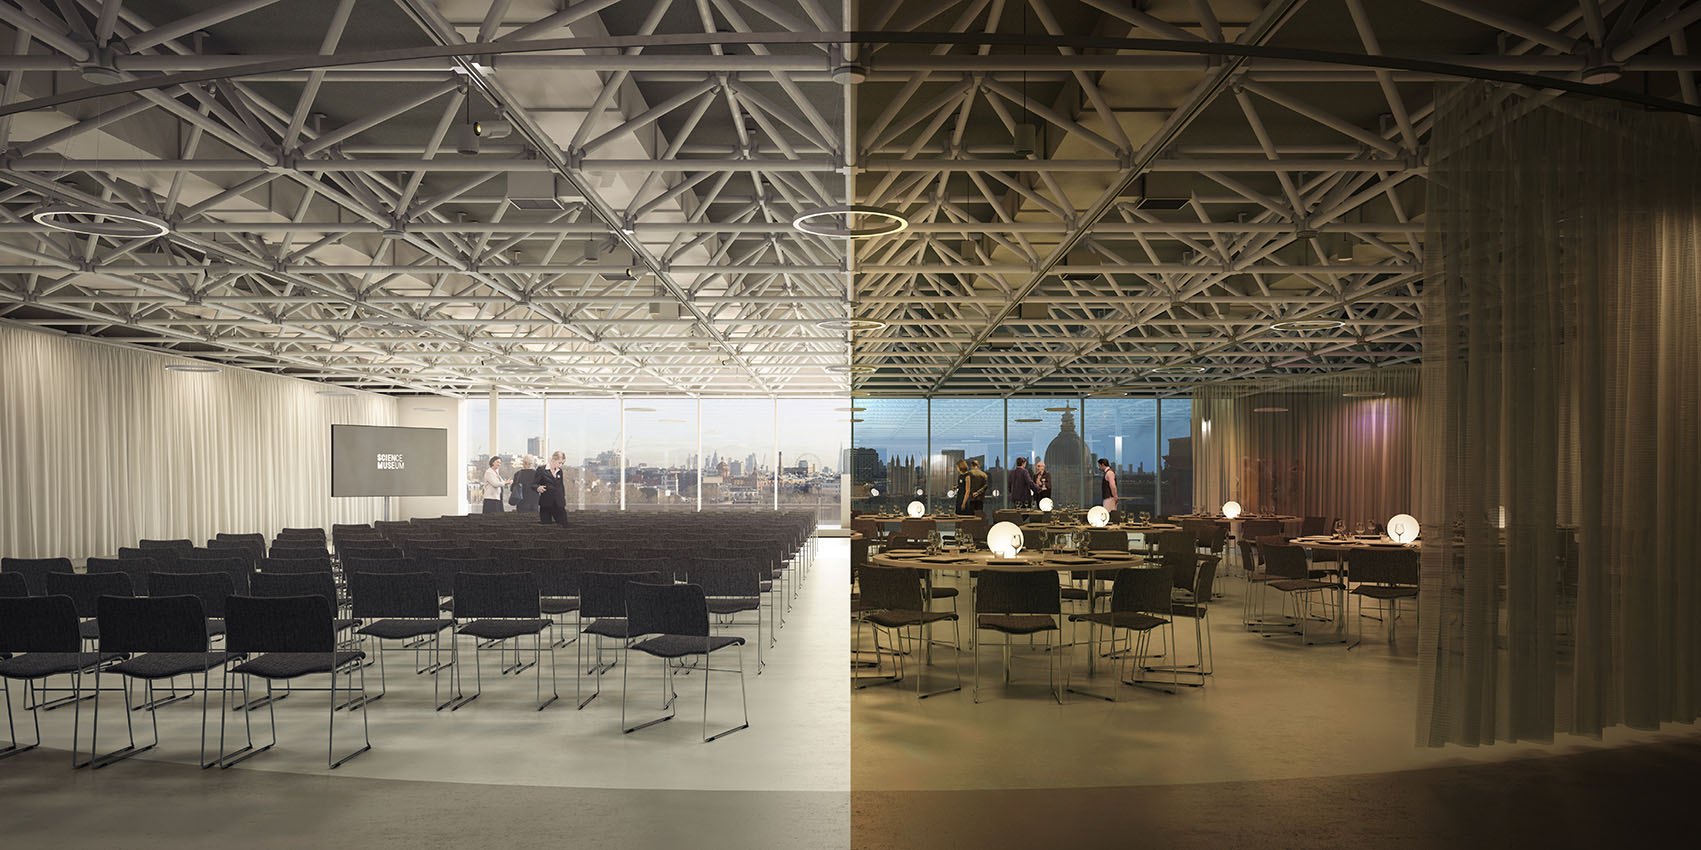 CGI Image of daytime & evening view in Illuminate at the Science Museum